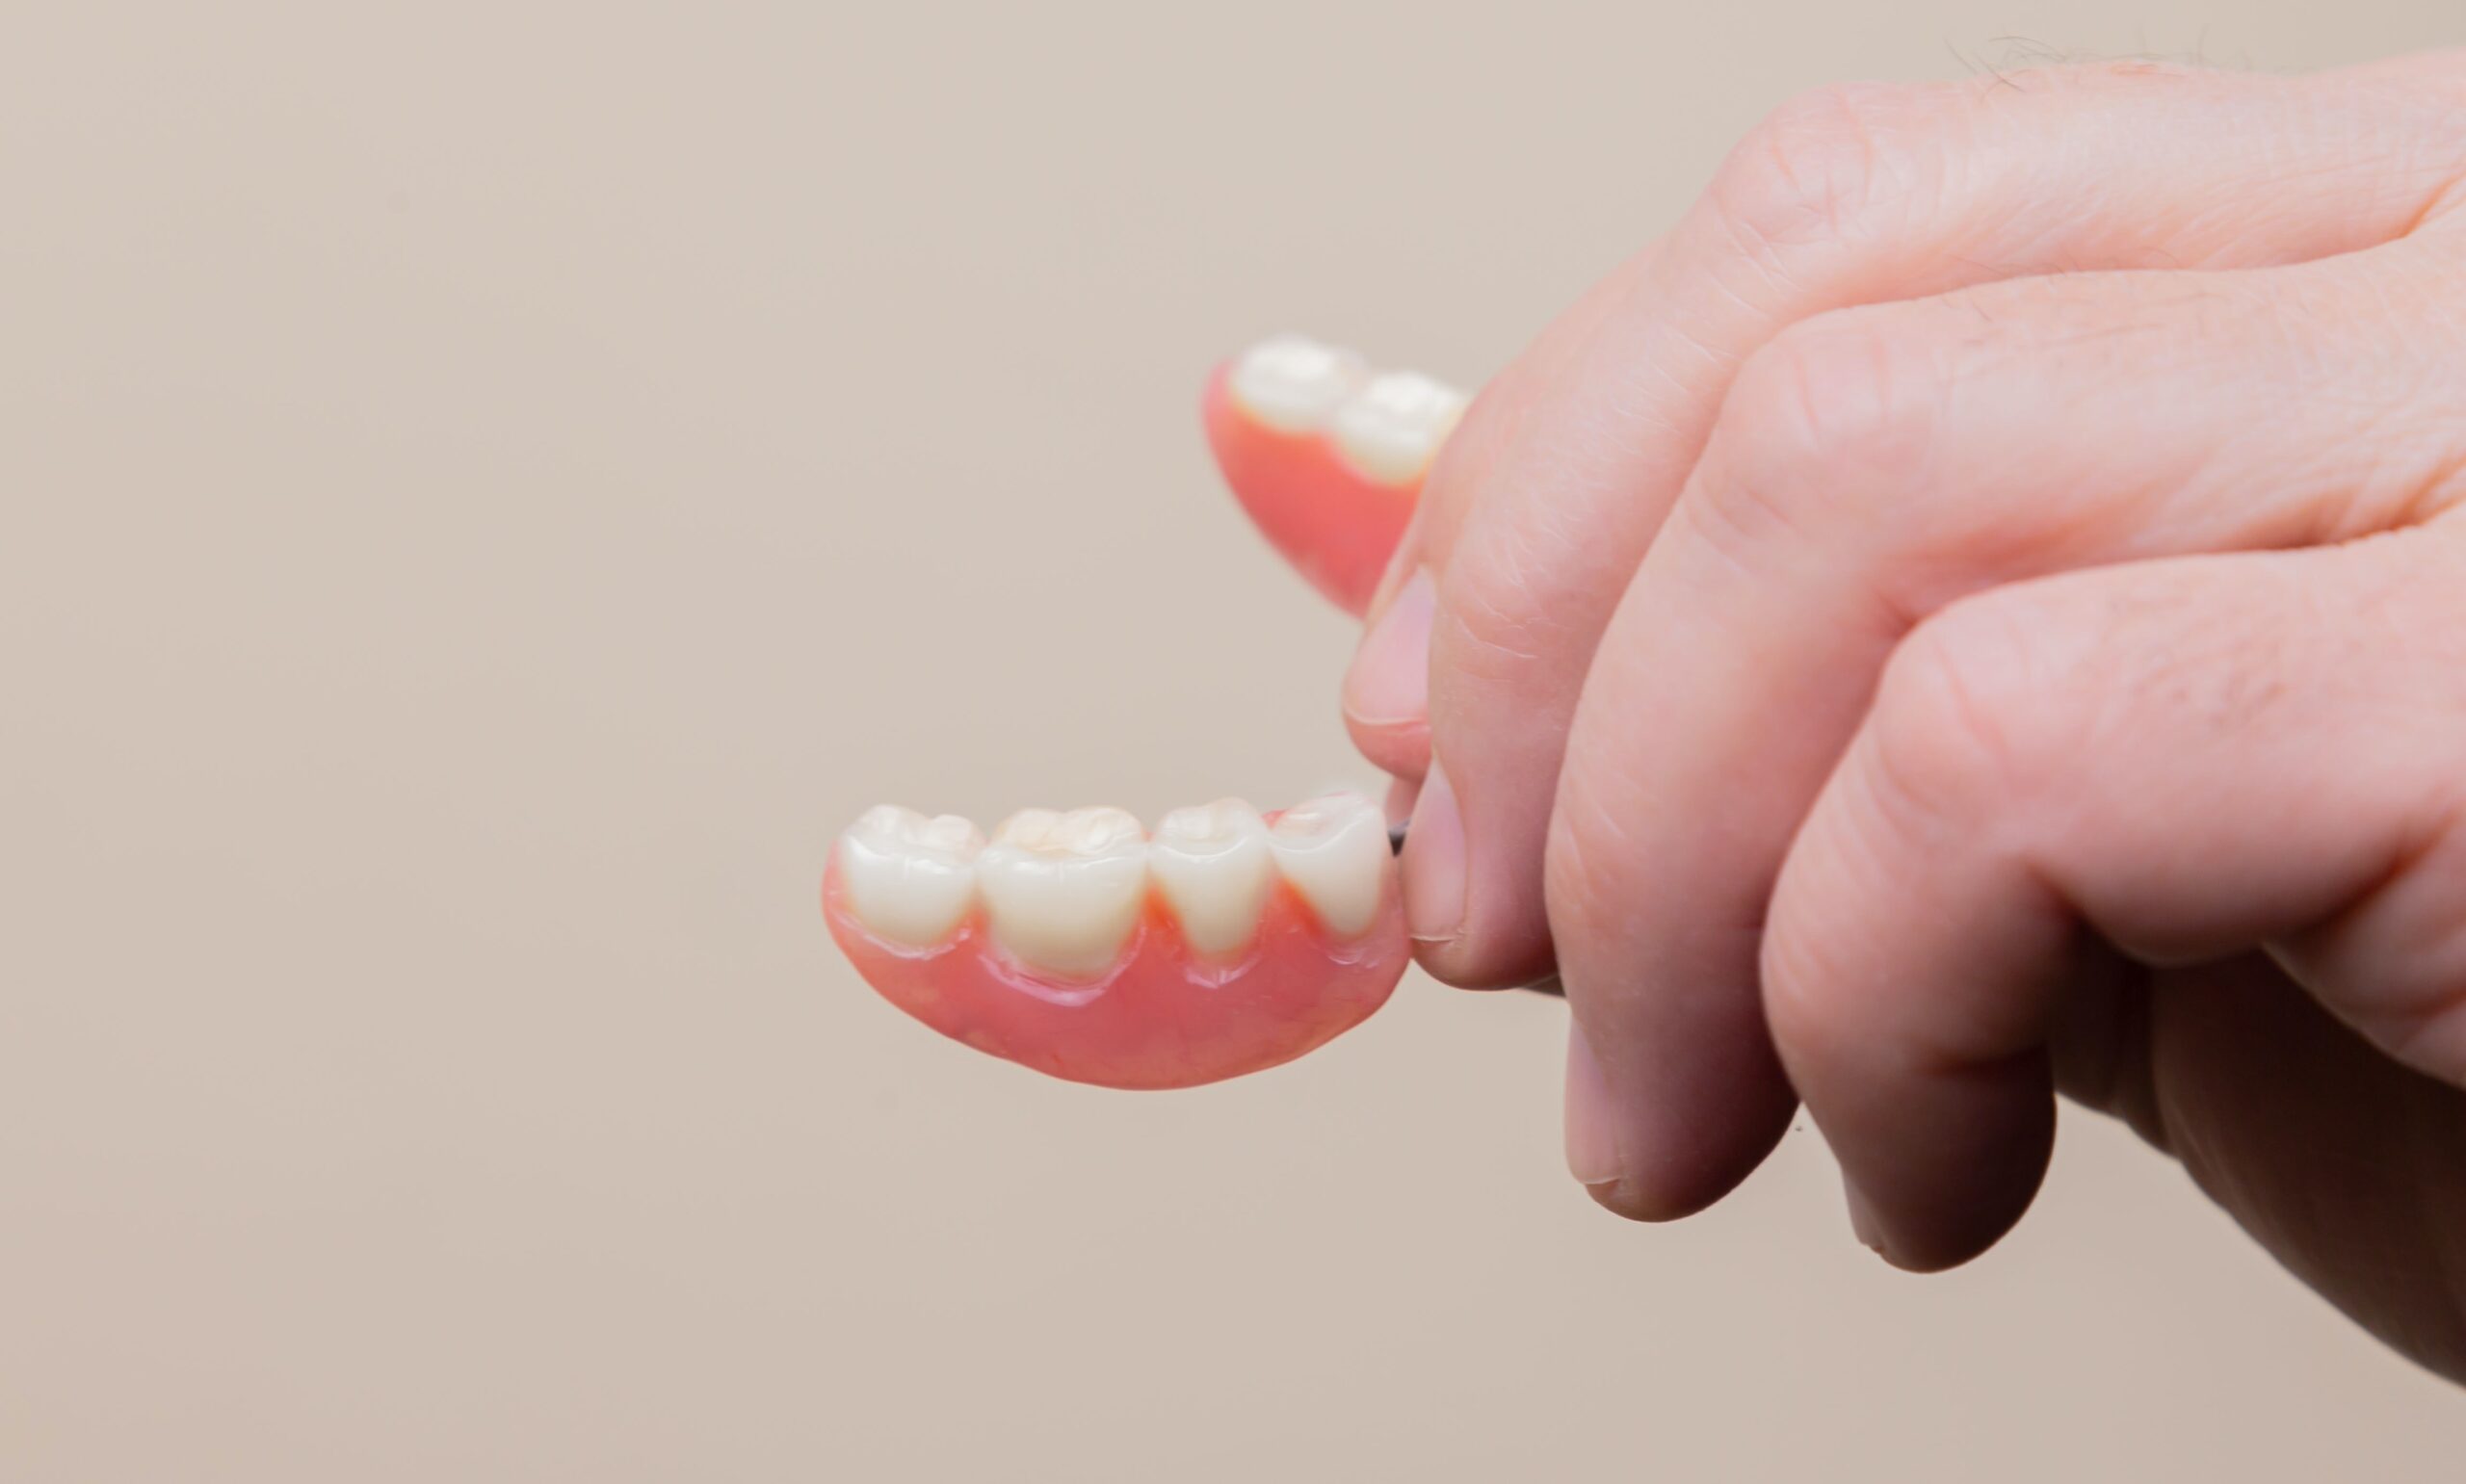 A hand holding a set of upper dentures against a neutral background in a dental office.